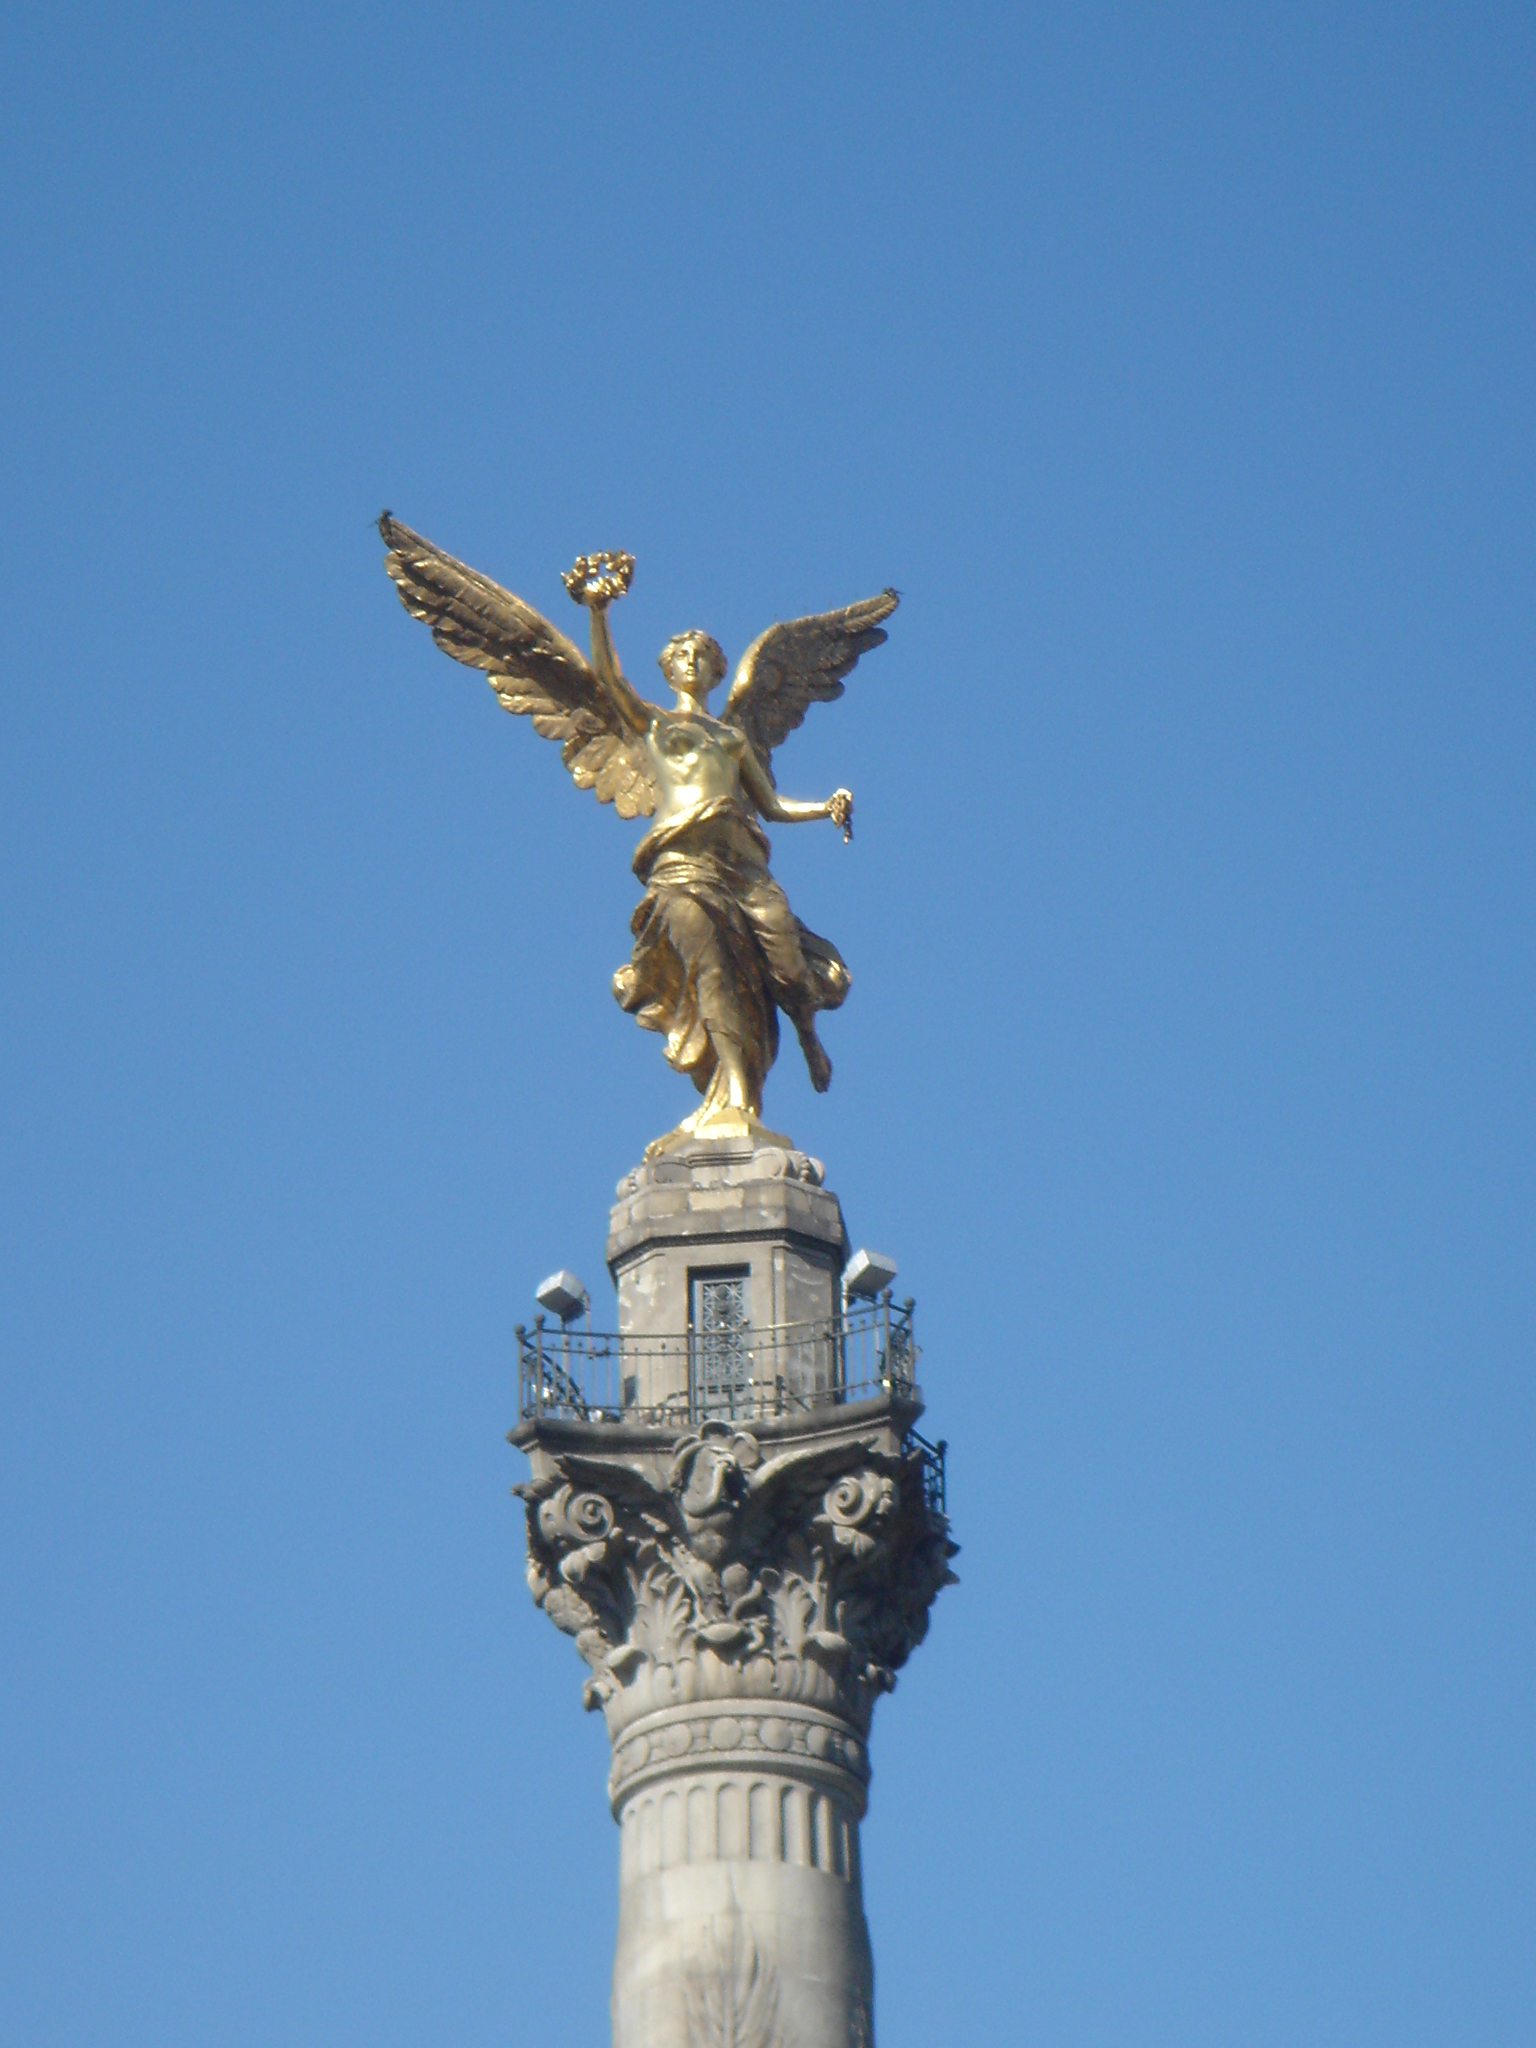 File:Angel Monumento a la Independencia.jpg - Wikimedia Commons